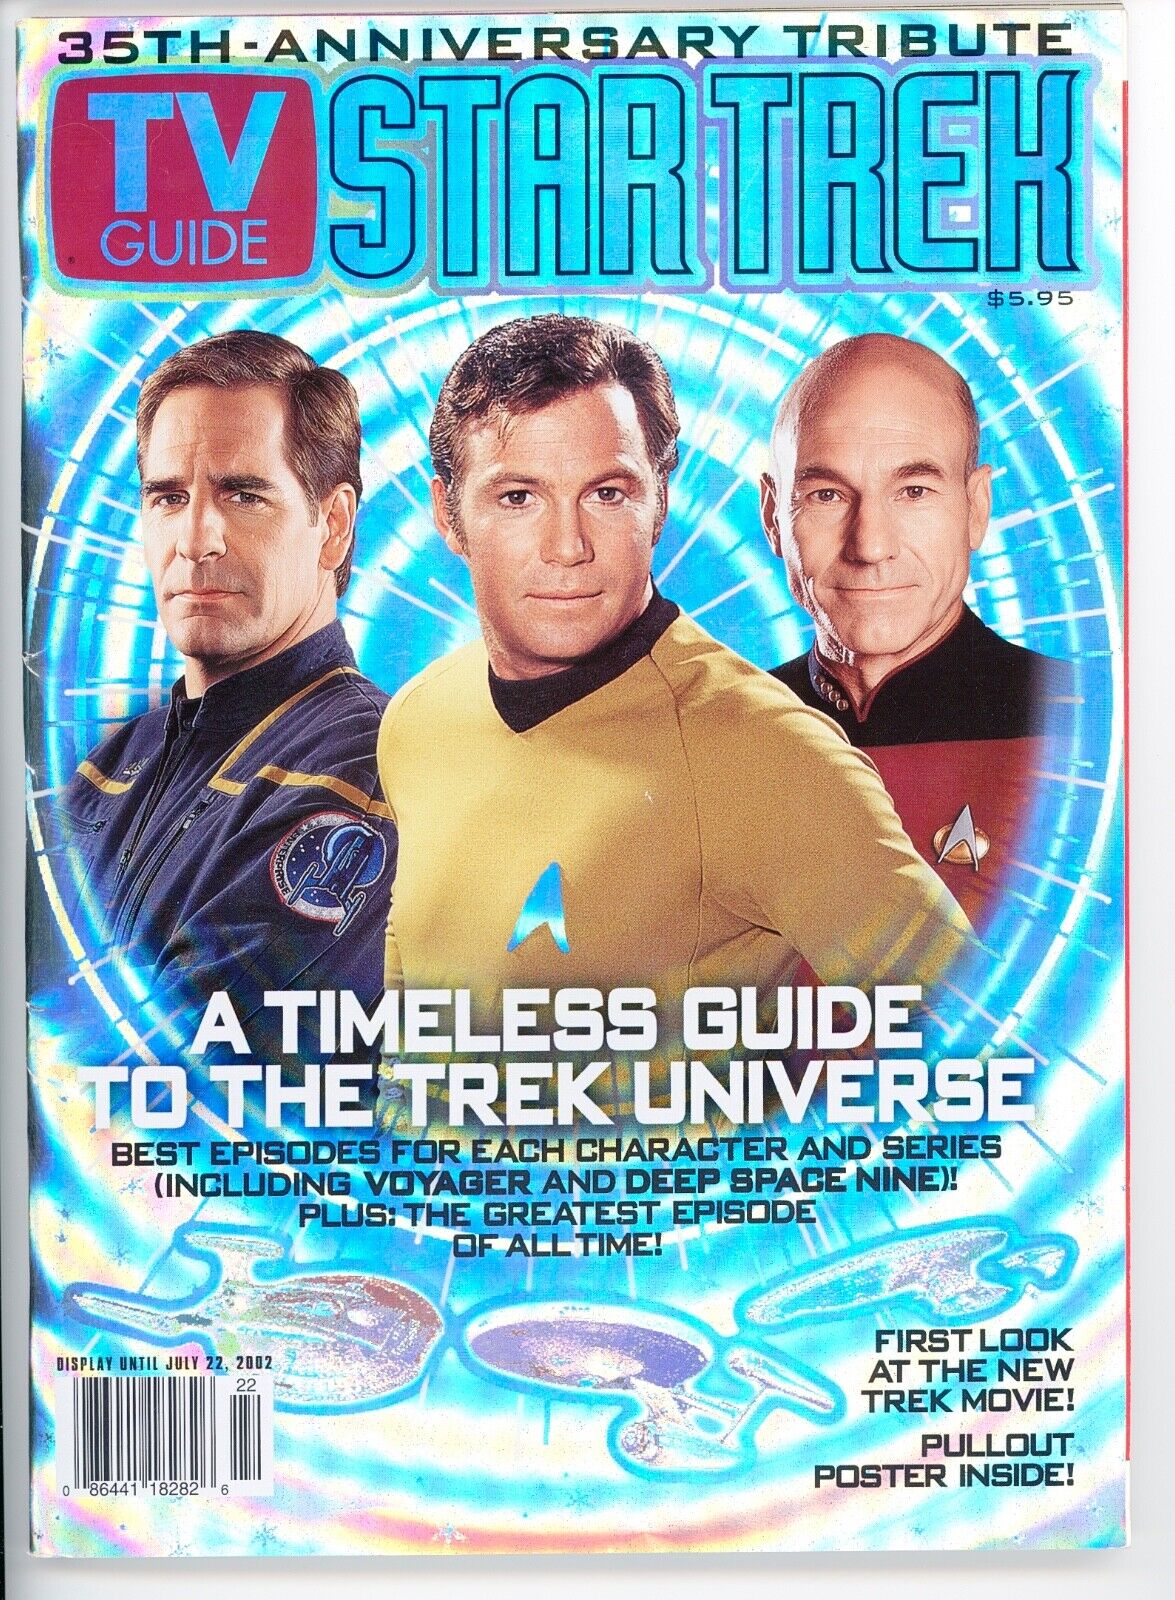 July 2002 Vintage TV Guide 35th STAR TREK Anniversary Edition - Mint Condition